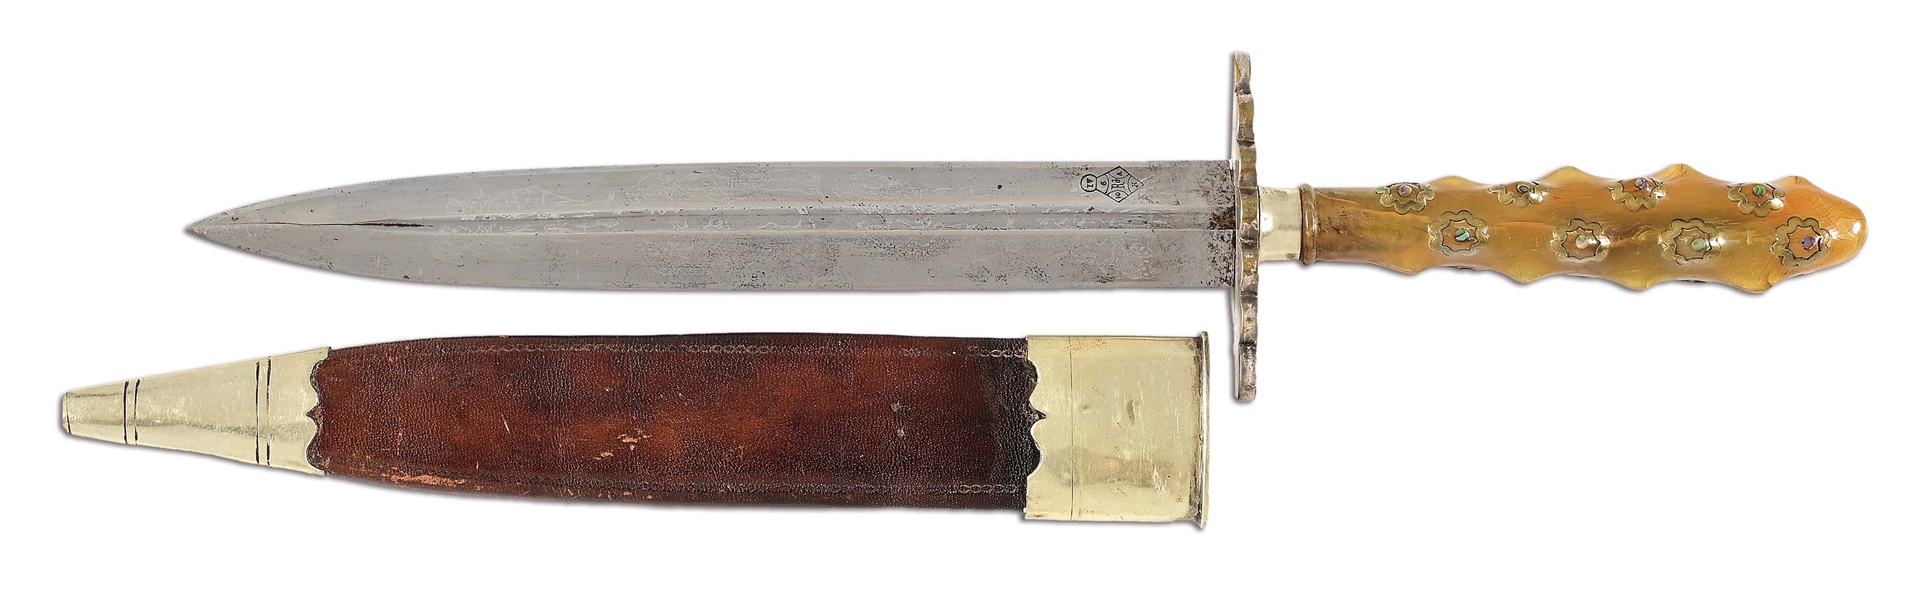 UNUSUAL VICTORIAN ERA SHEFFIELD DAGGER WITH UNUSUAL ETCHED BLADE AND INLAID HORN HANDLE.